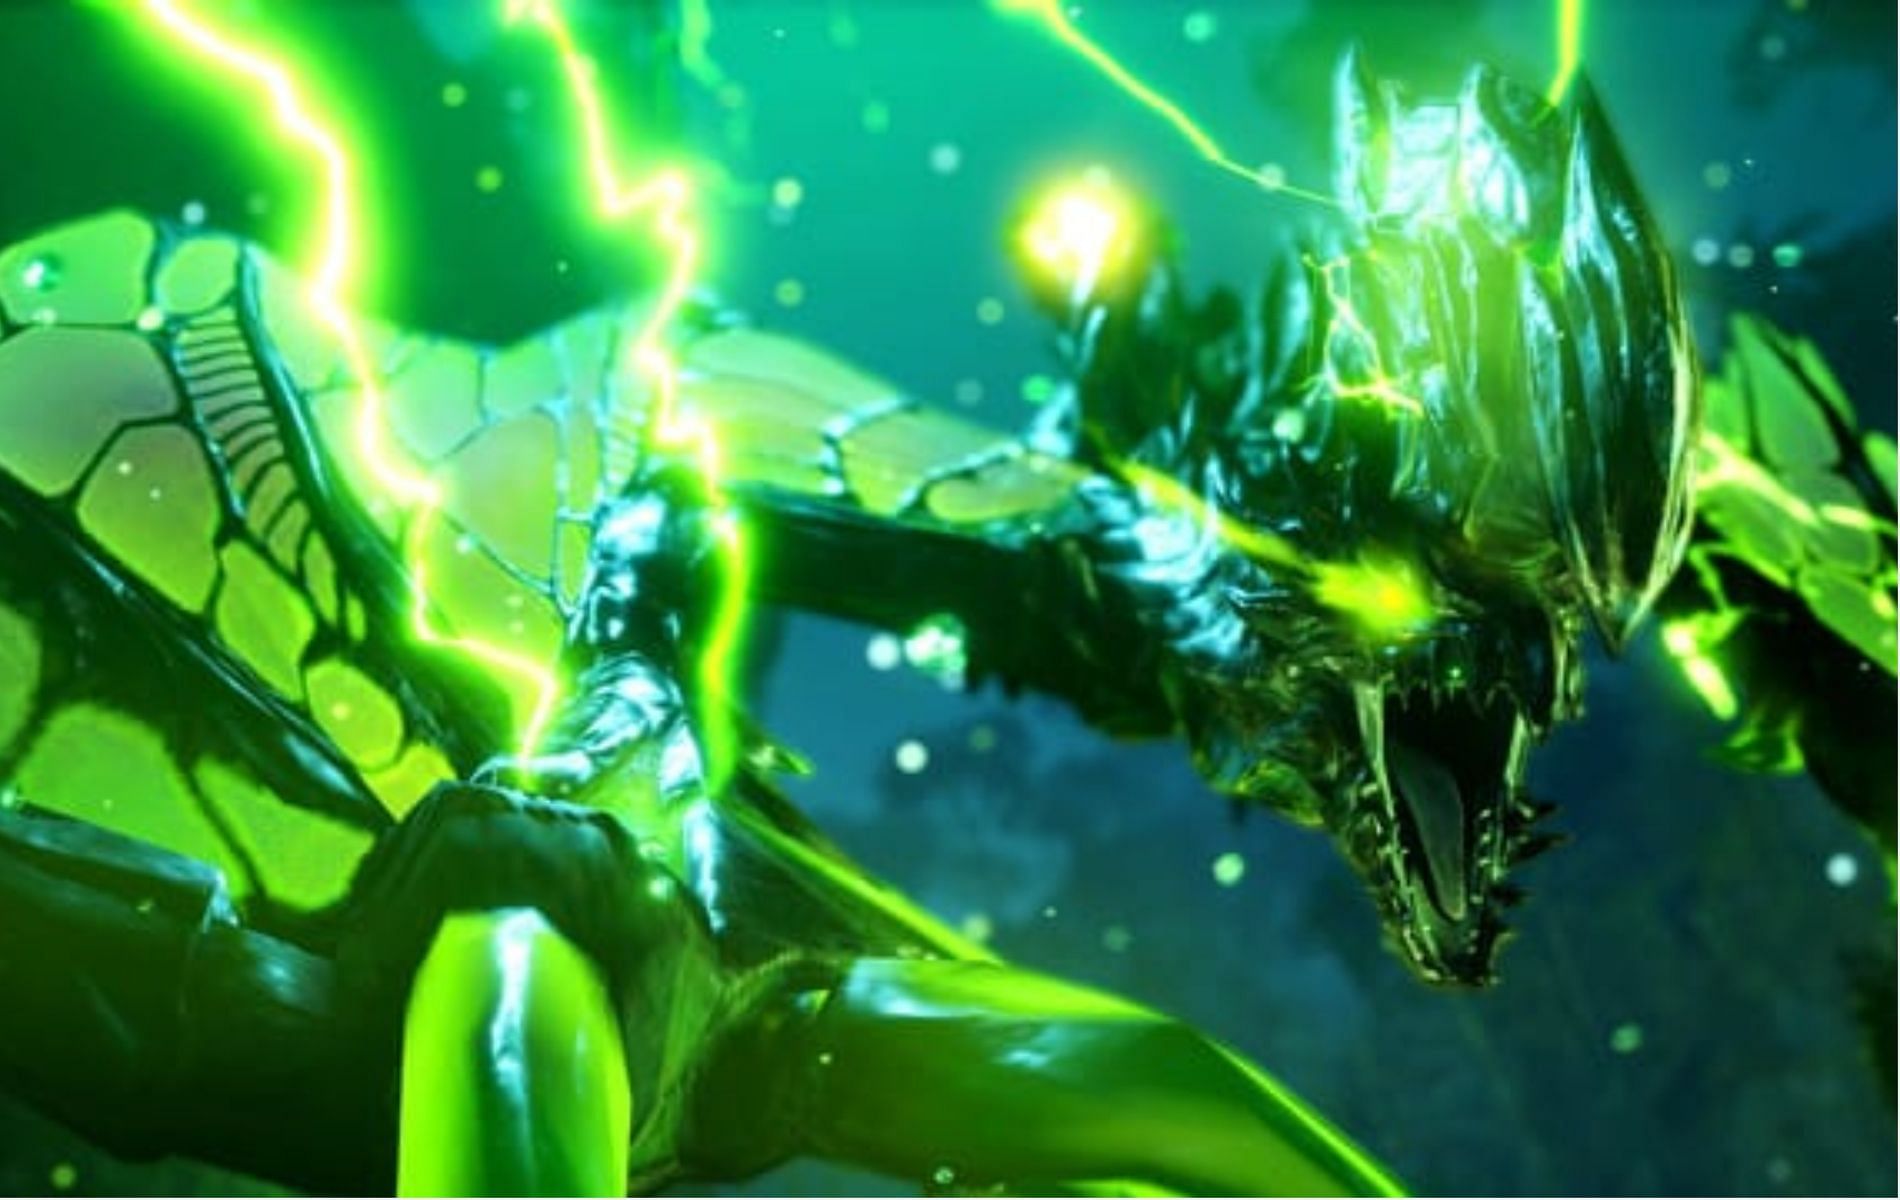 Astalos is very intimidating with its fierce green body and lightning imbued attacks (Image via Capcom)